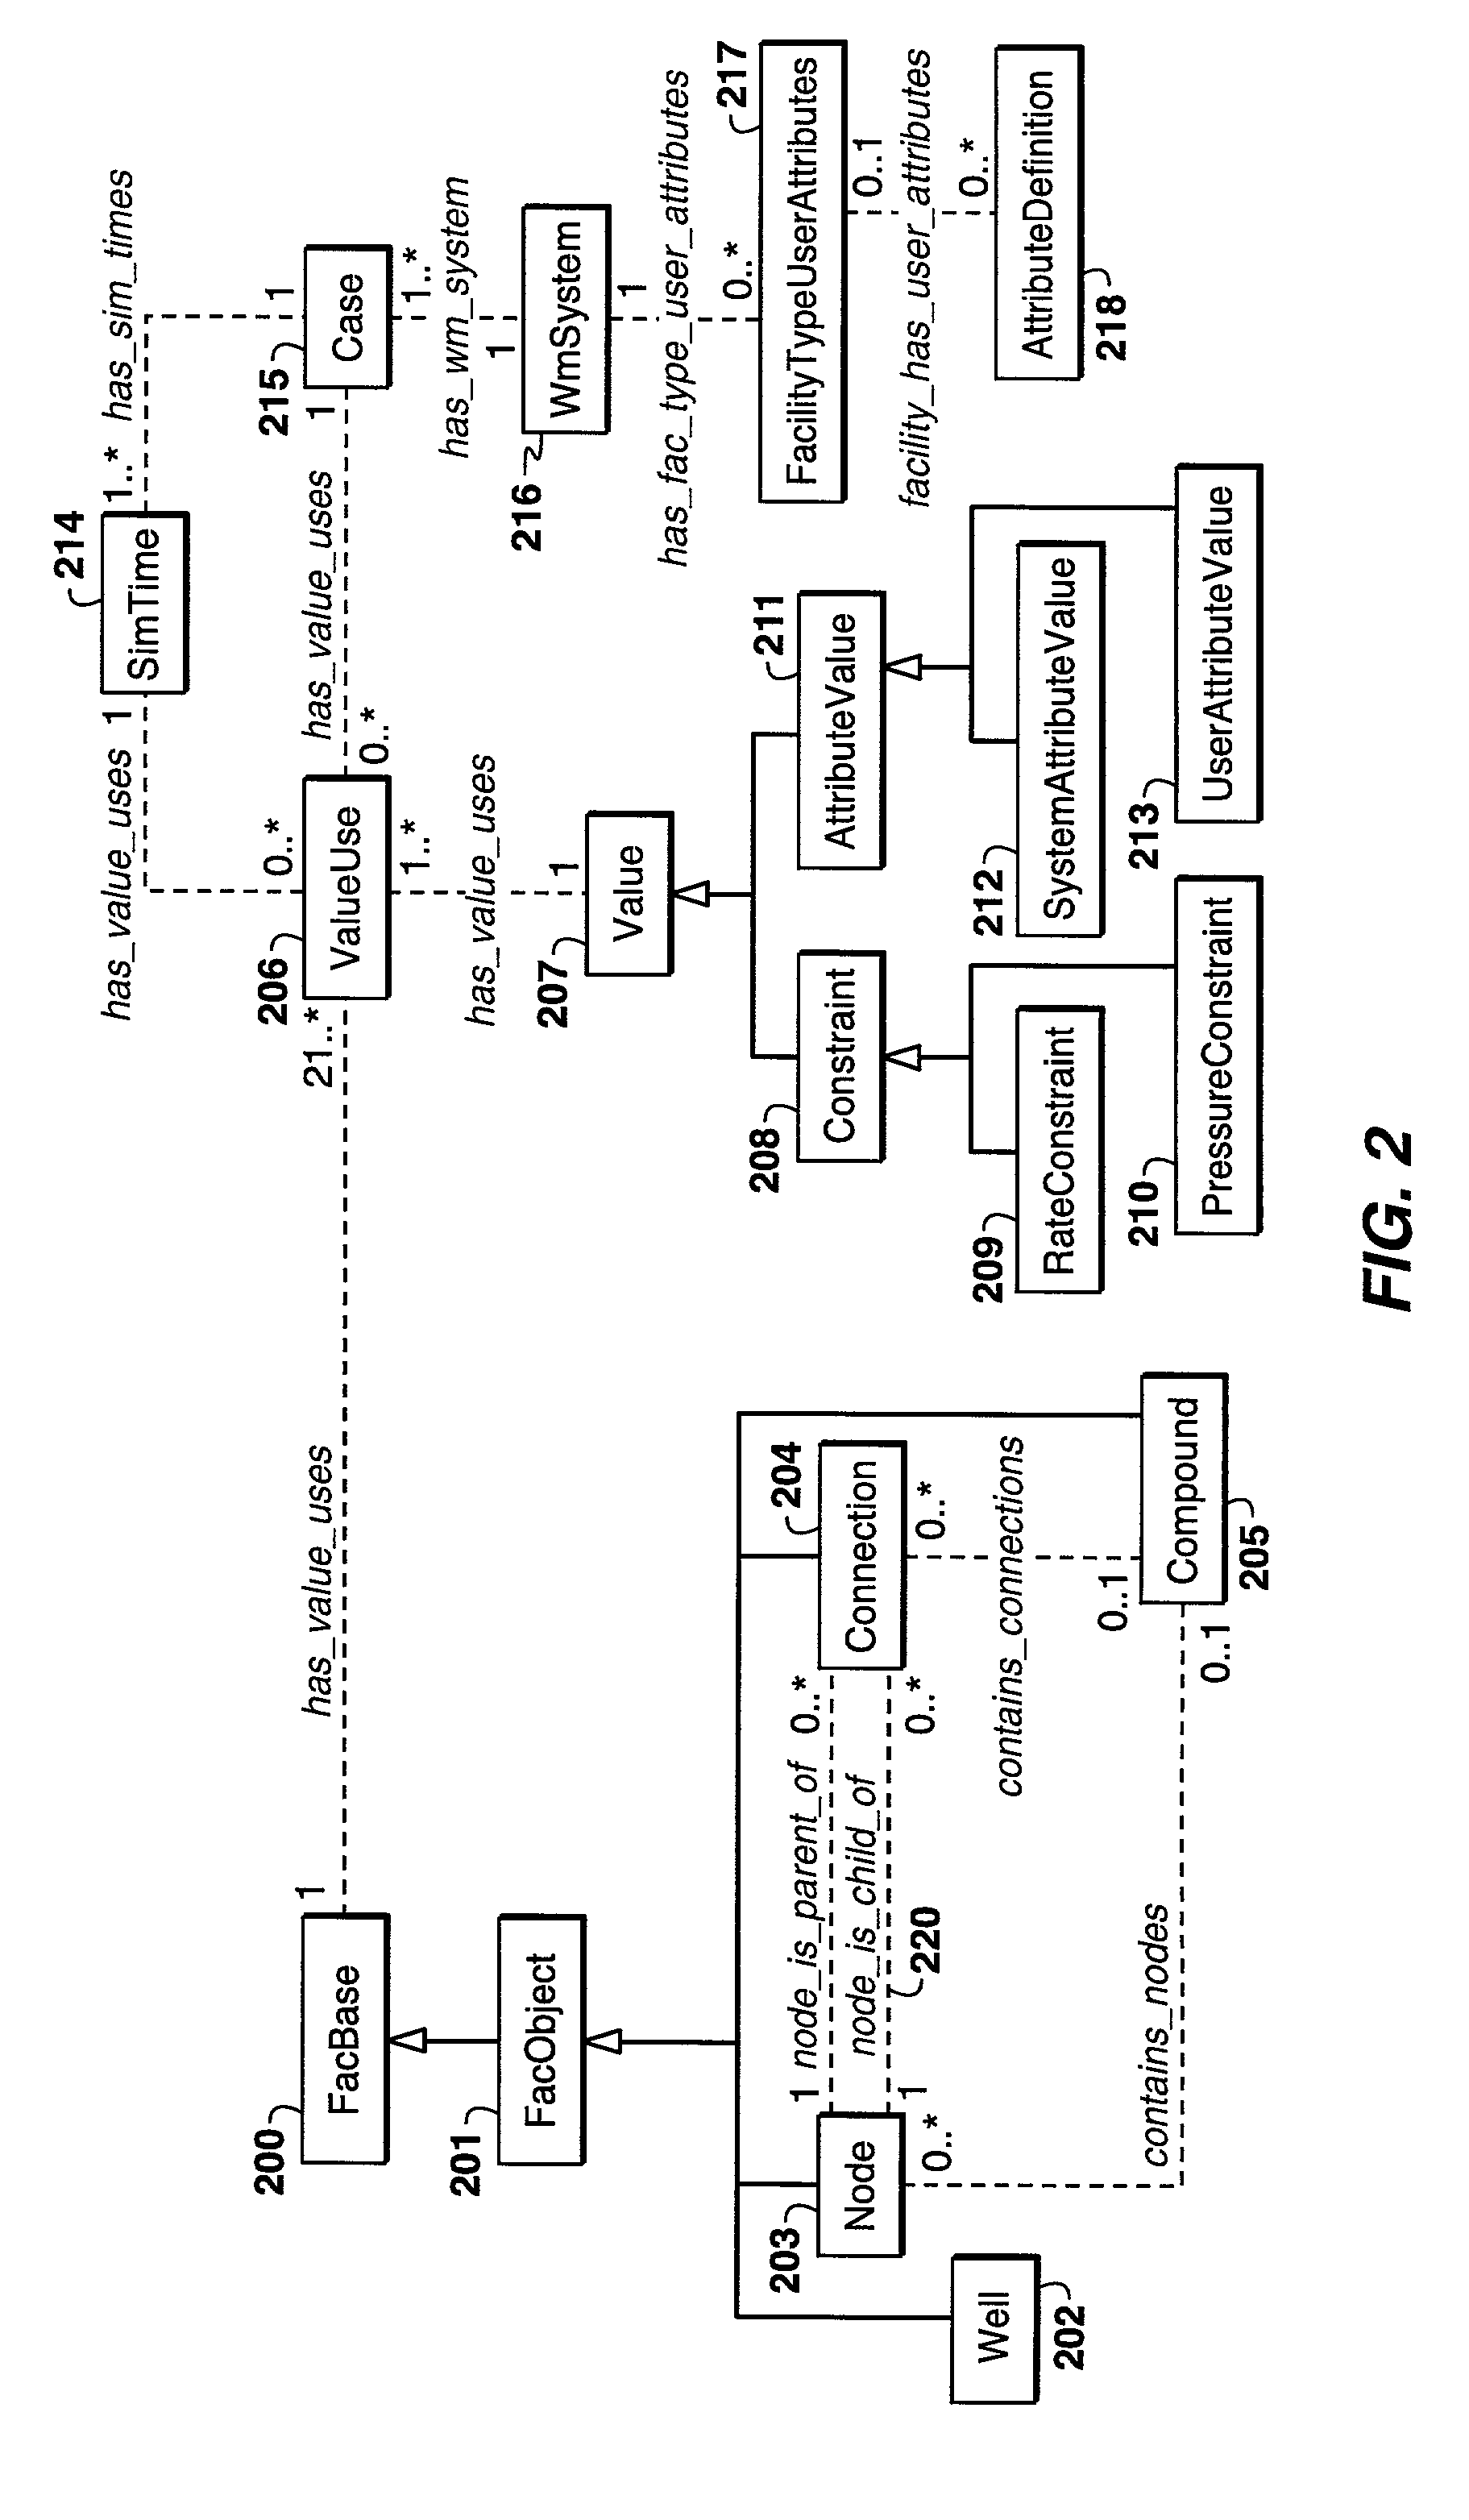 Computer system and method having a facility network architecture